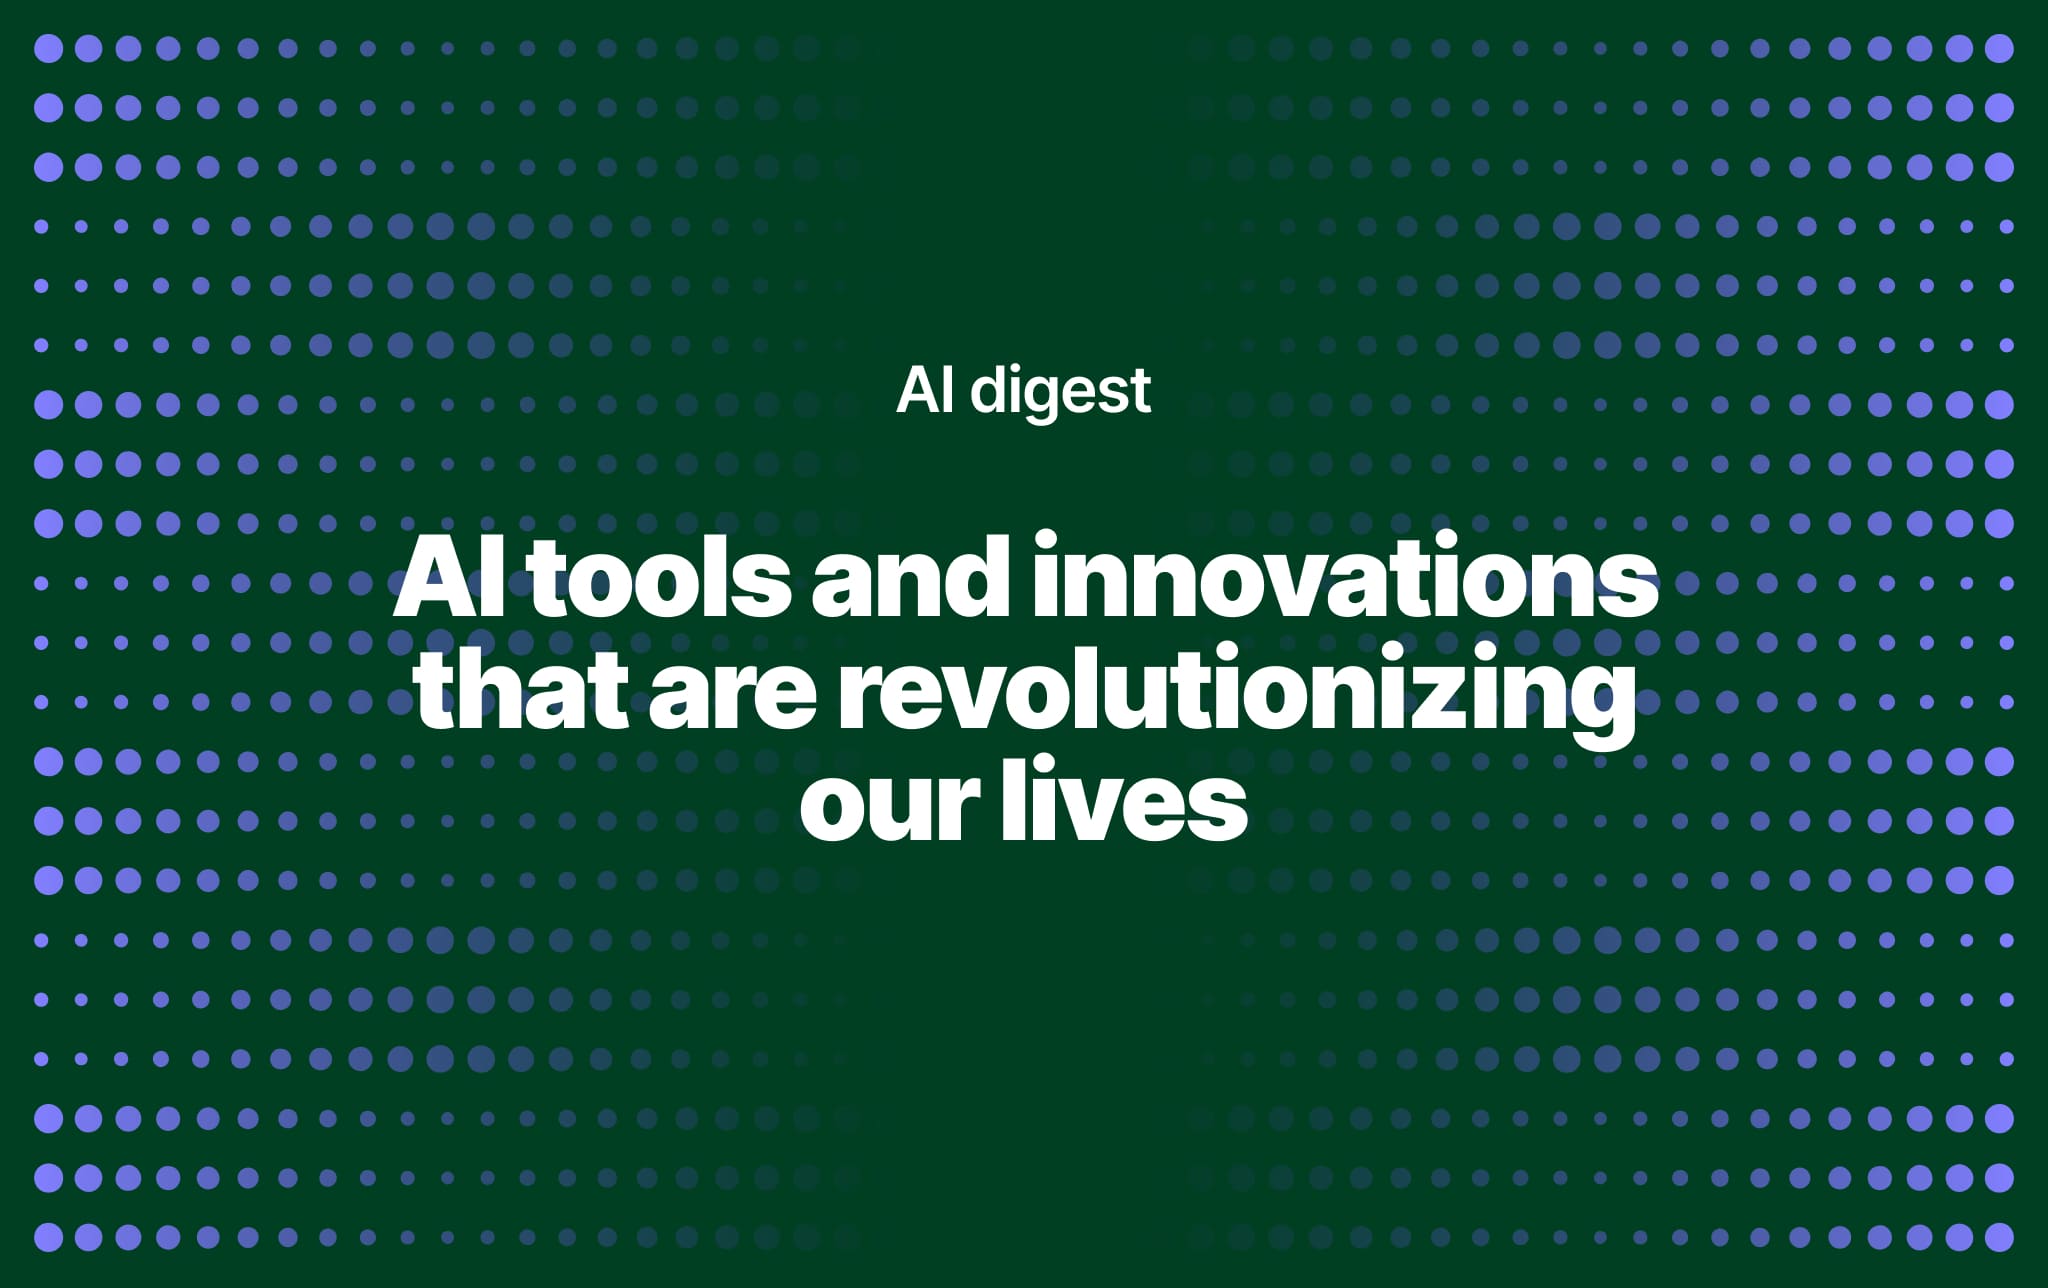 AI tools and innovations that are revolutionizing our lives